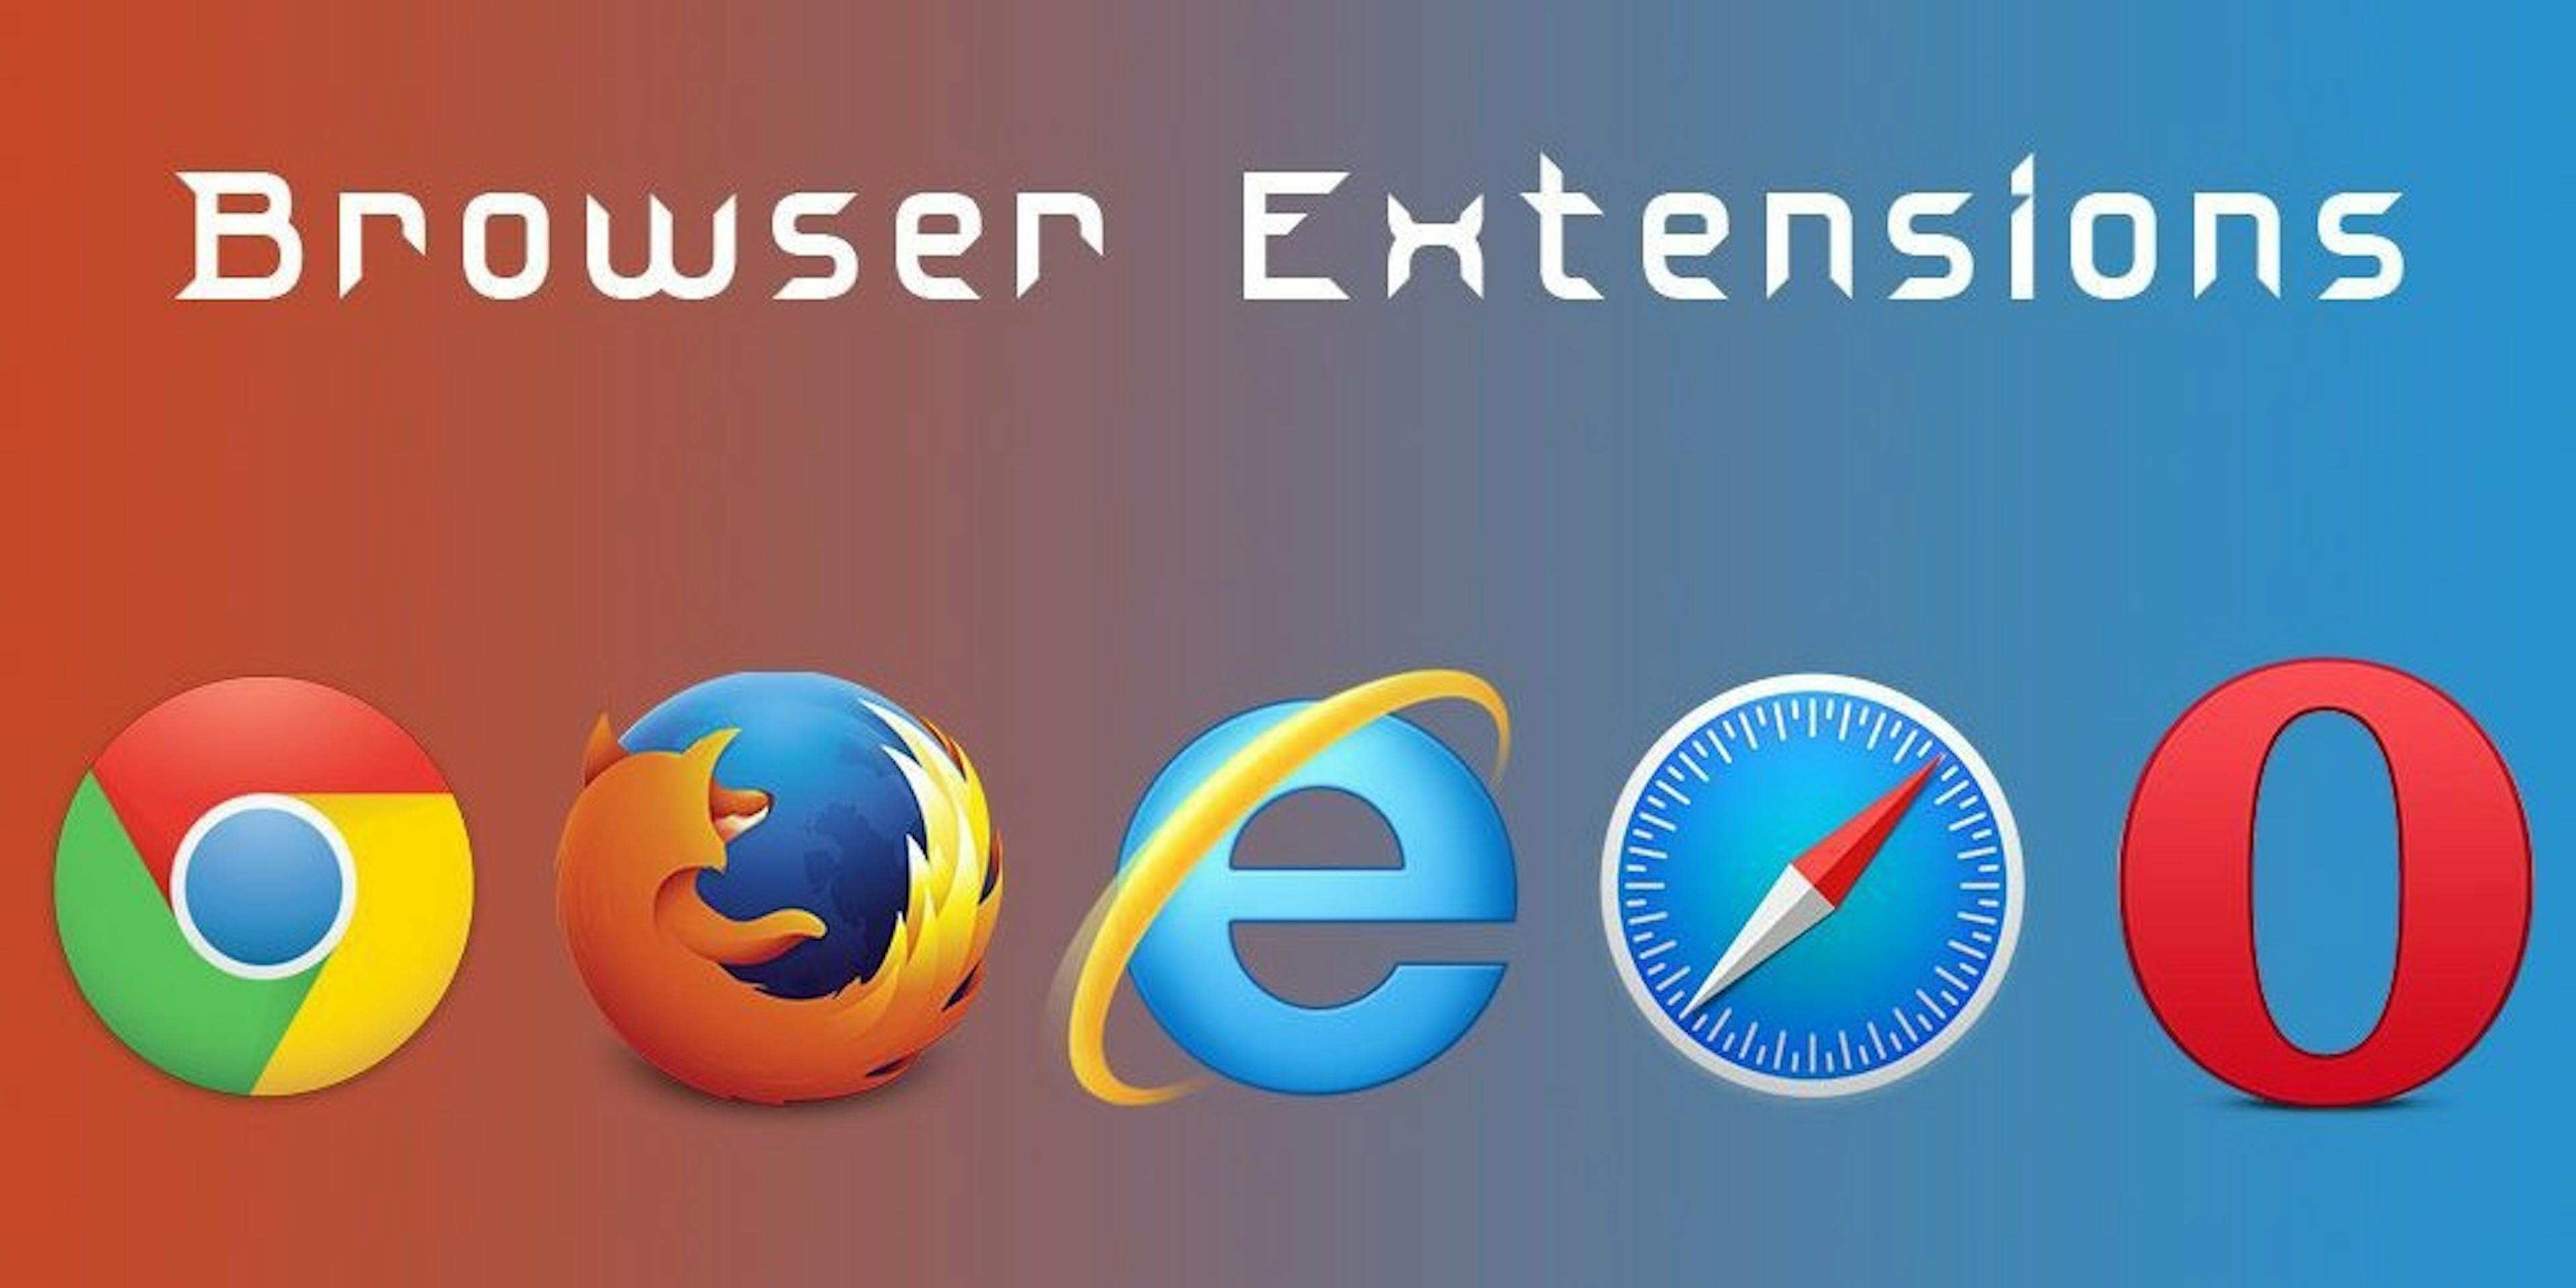 /the-best-extensions-for-browser-privacy-and-security-zs2f42snc feature image